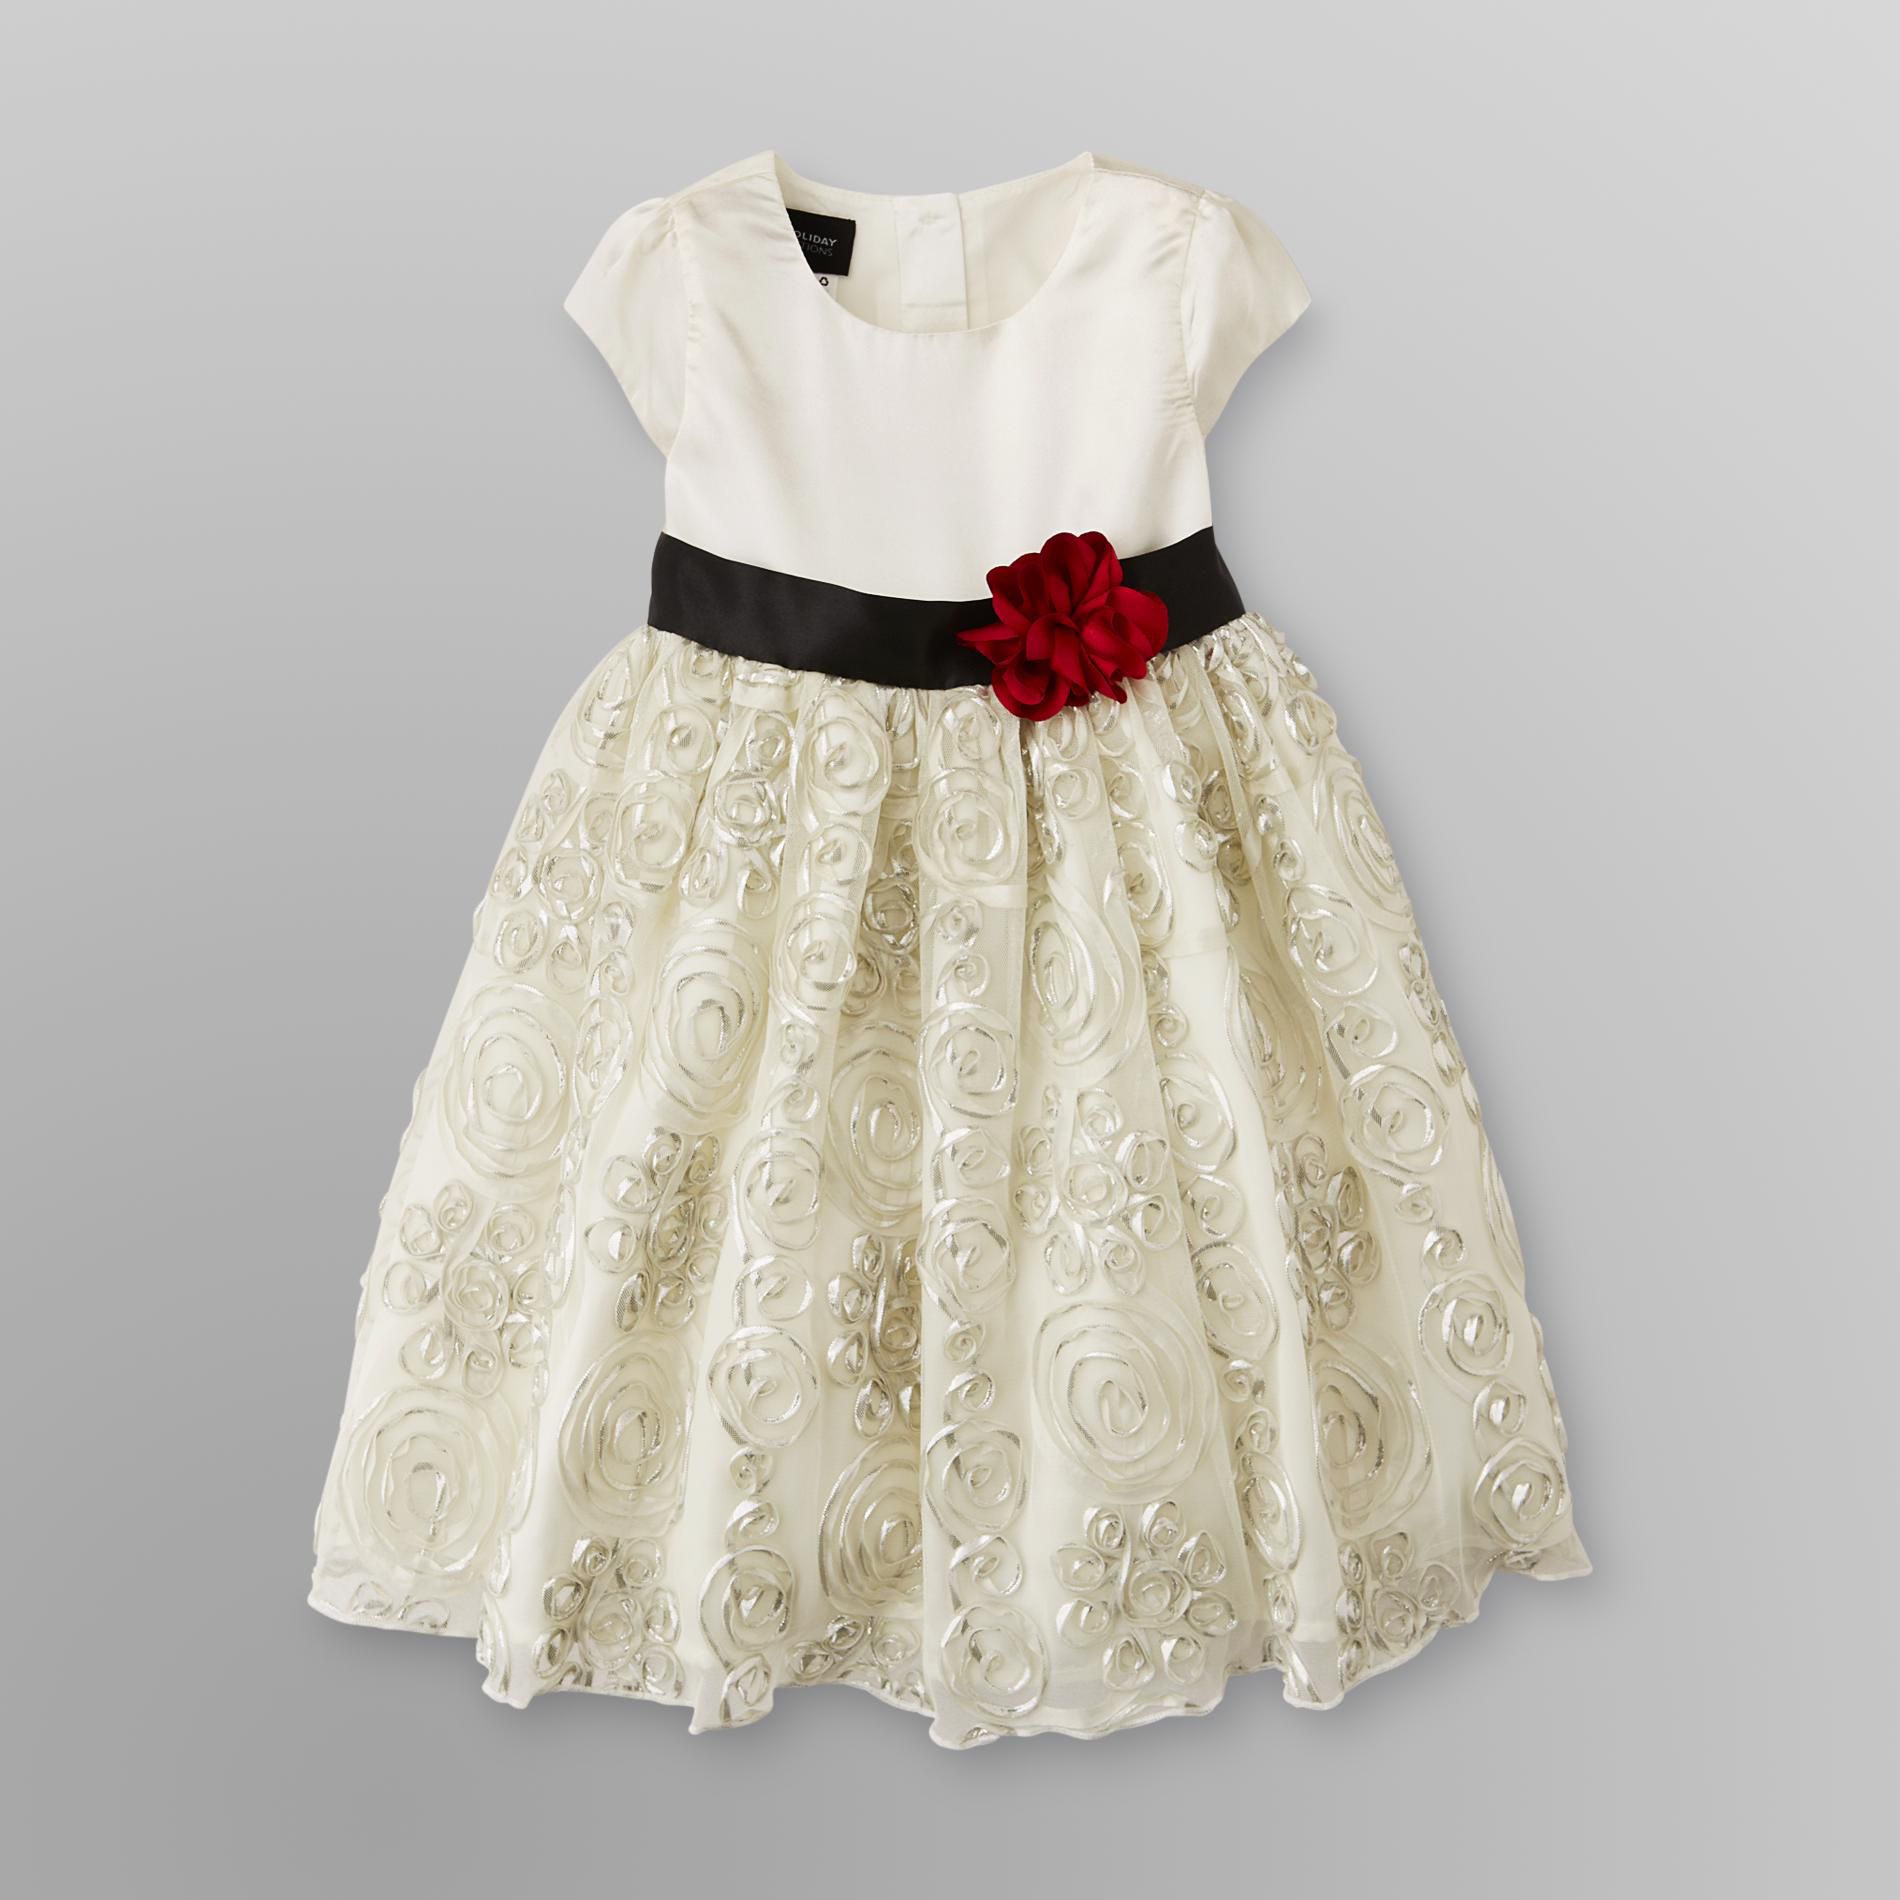 Holiday Editions Infant & Toddler Girl's Rosette Holiday Dress